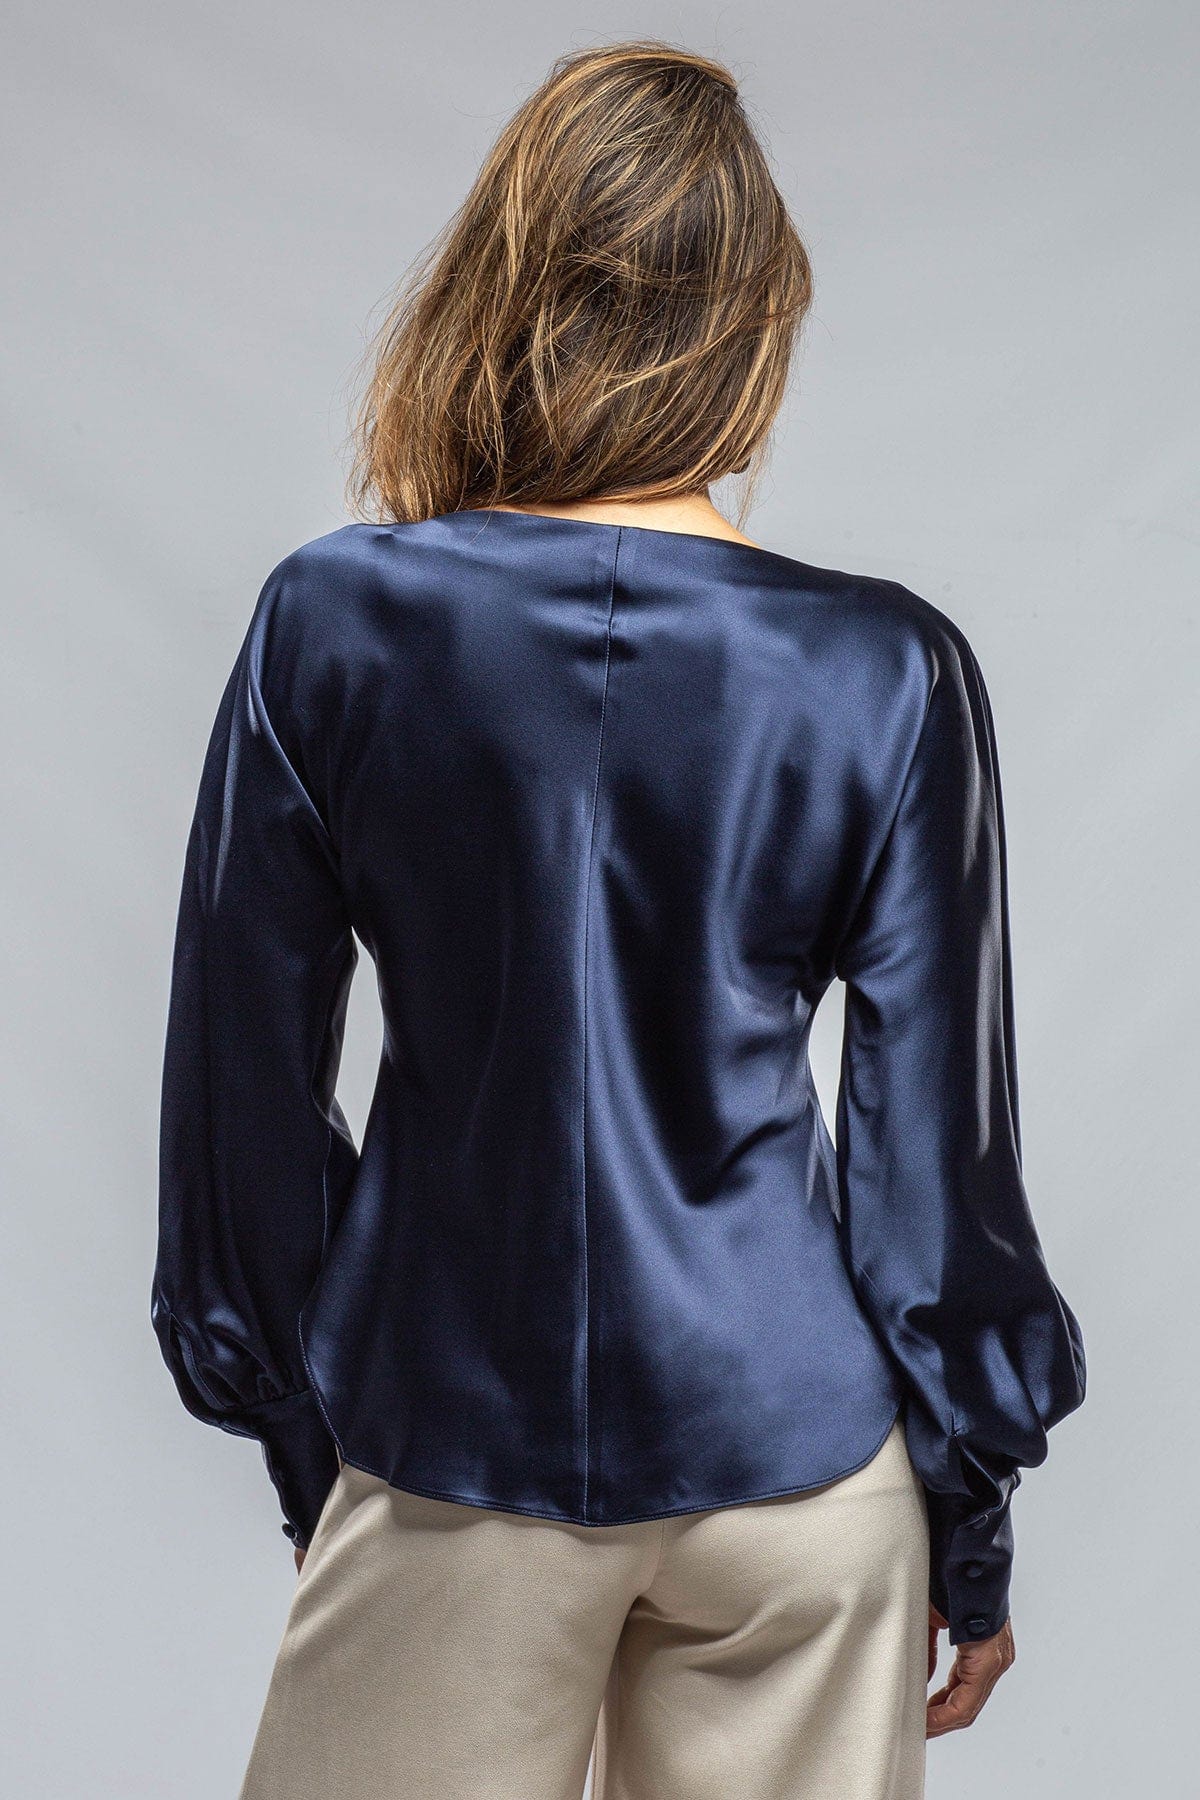 Boatneck Blouse, Silk Charmeuse, In Navy - AXEL'S